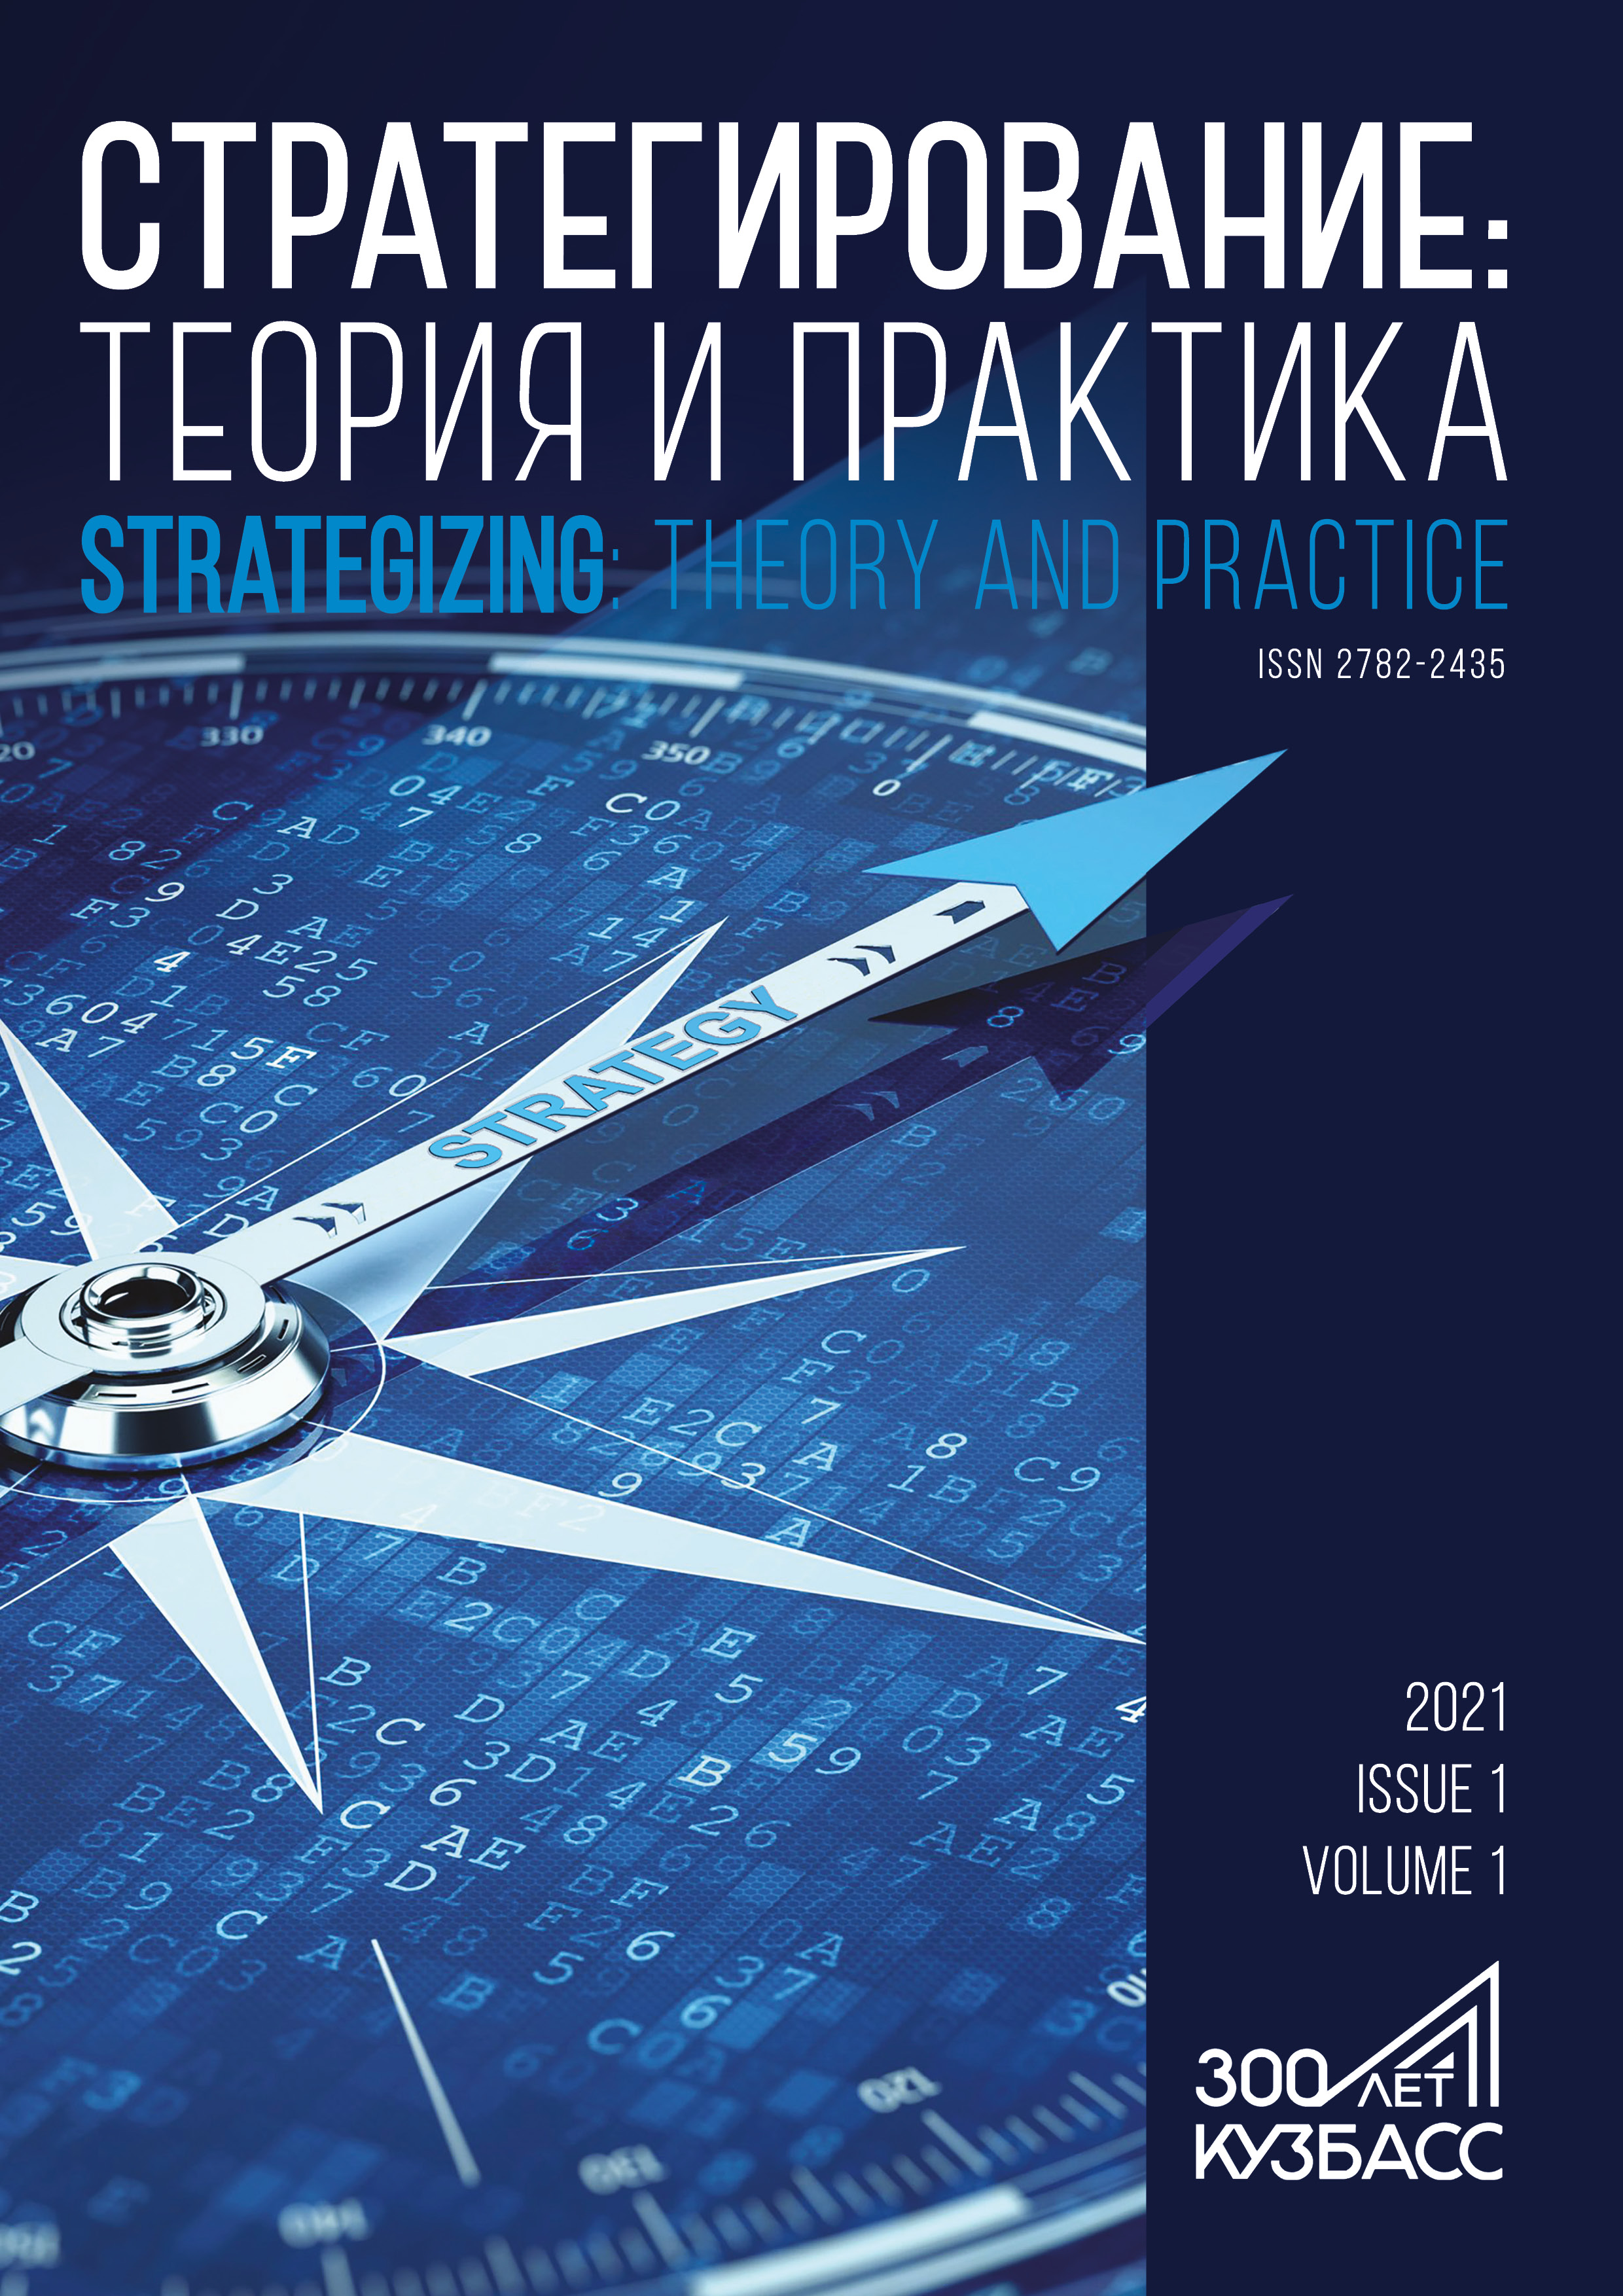                         A Strategic Approach to Russian Media System Analysis: Defining Mission, Values and Priorities
            